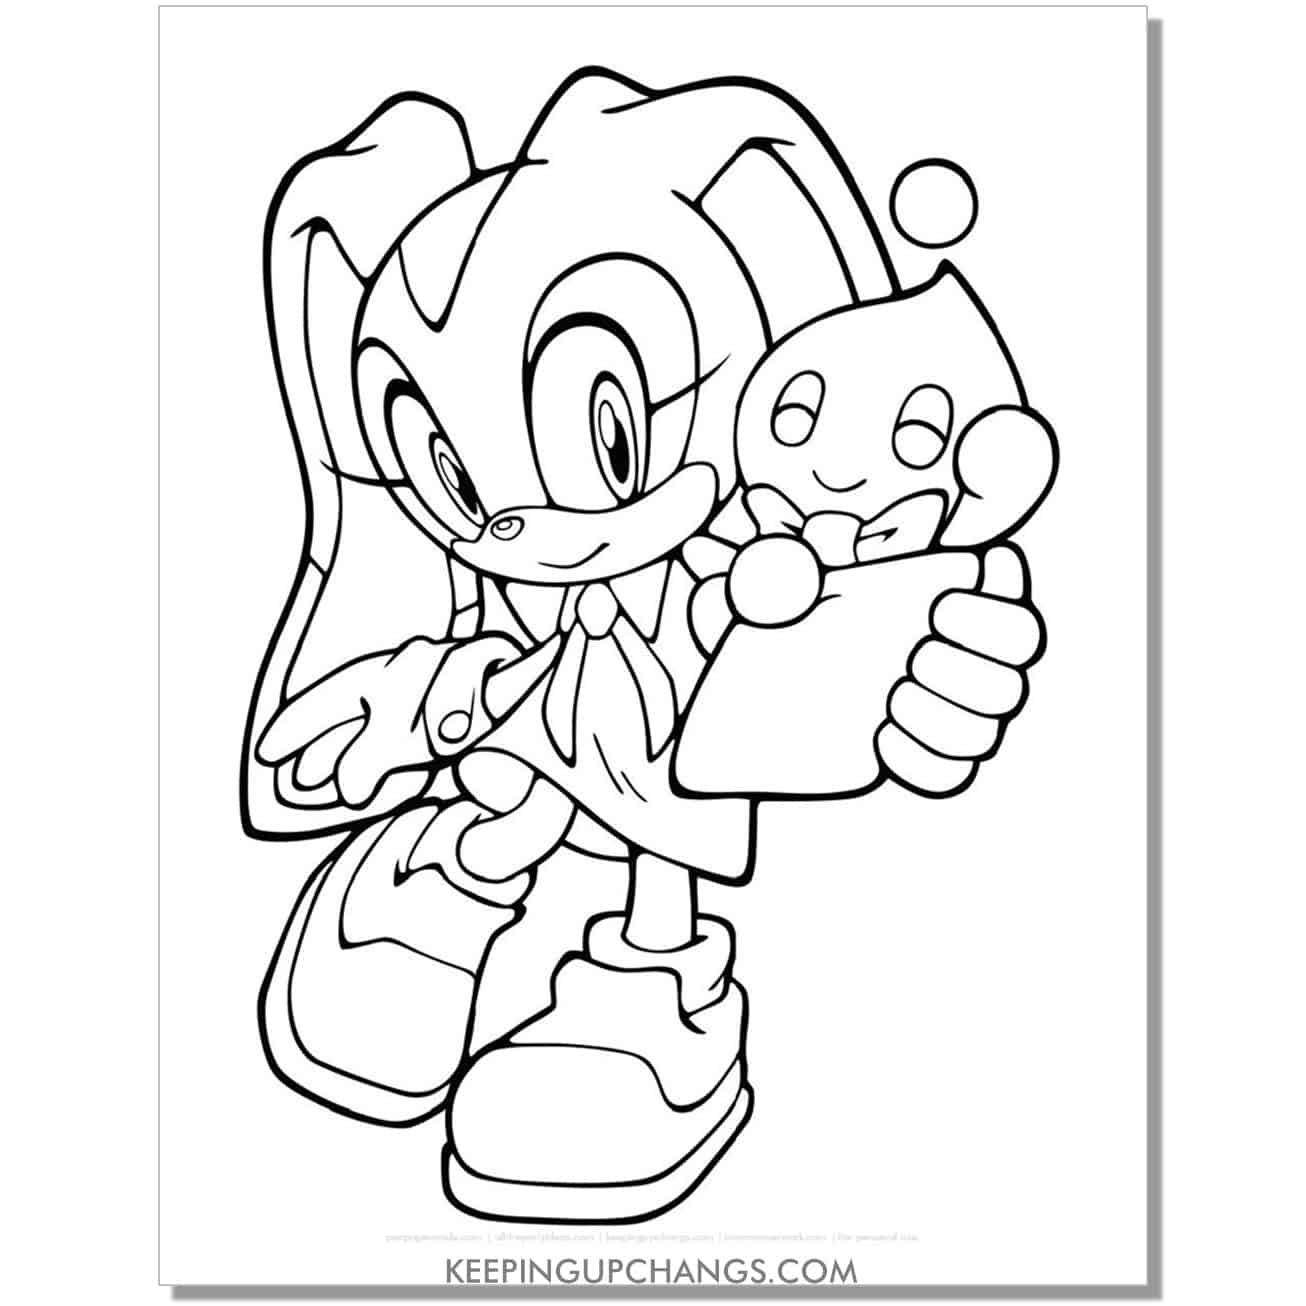 cream rabbit and cheese sonic coloring page.